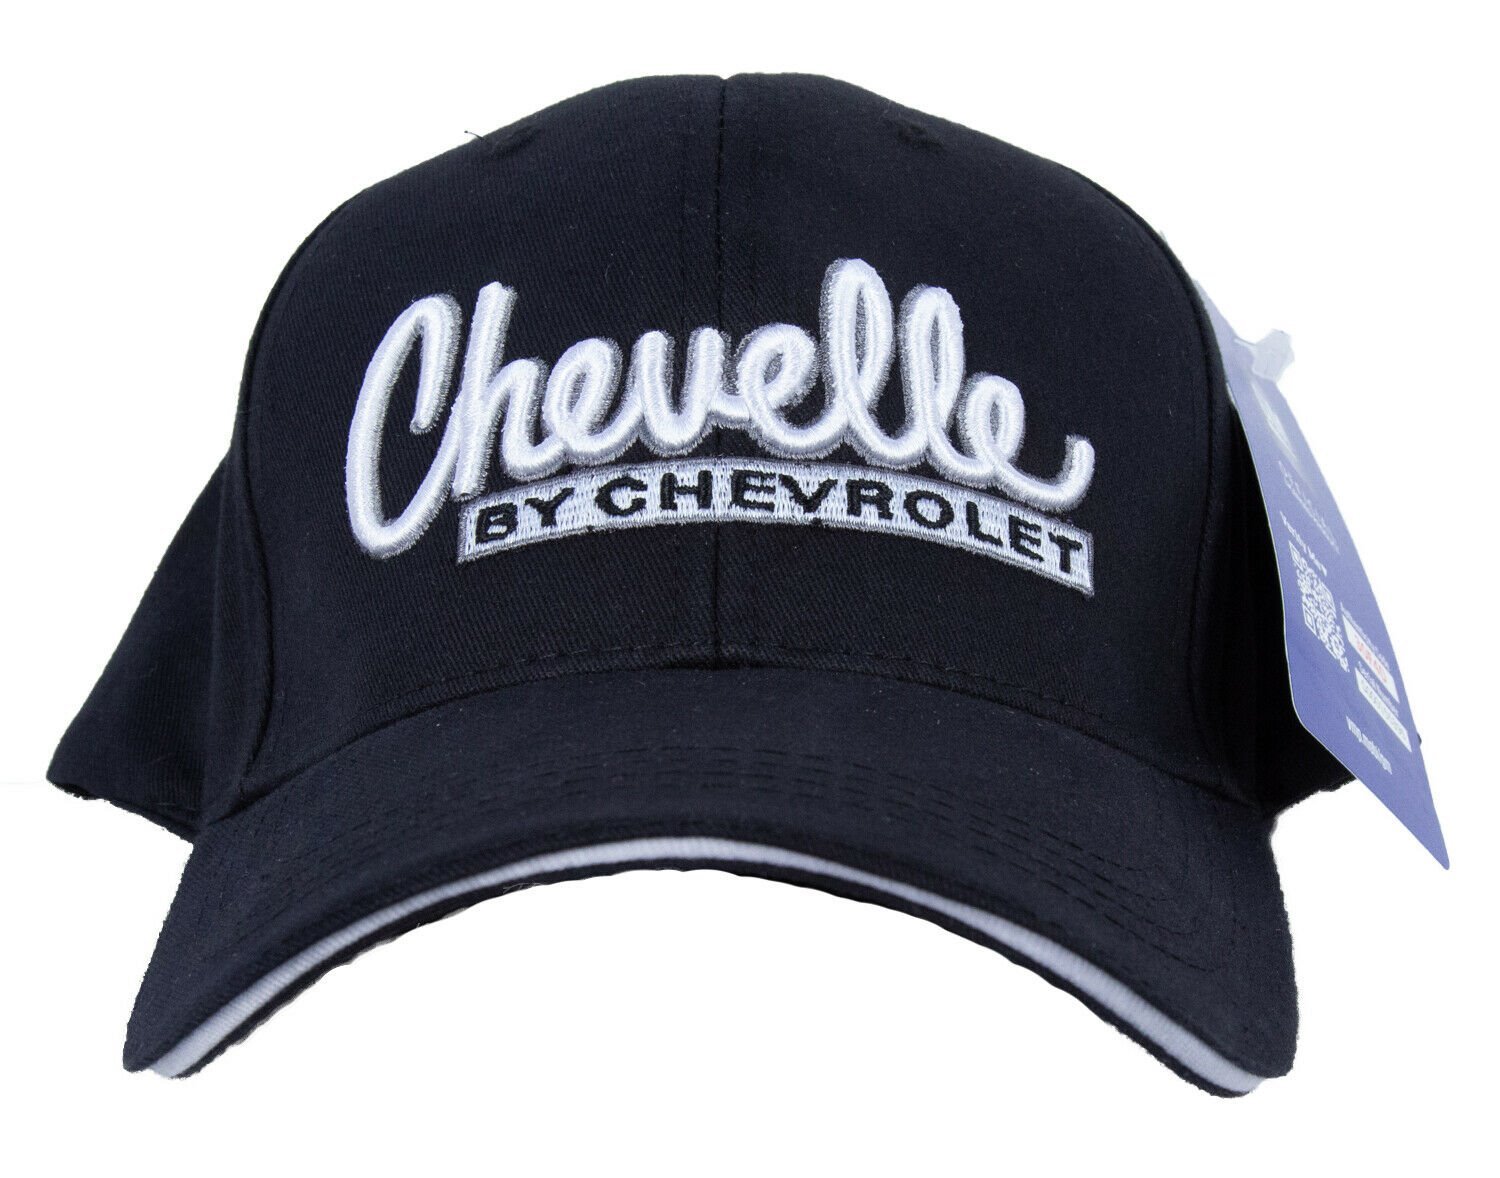 JEGS H239 "Chevelle by Chevrolet" Hat